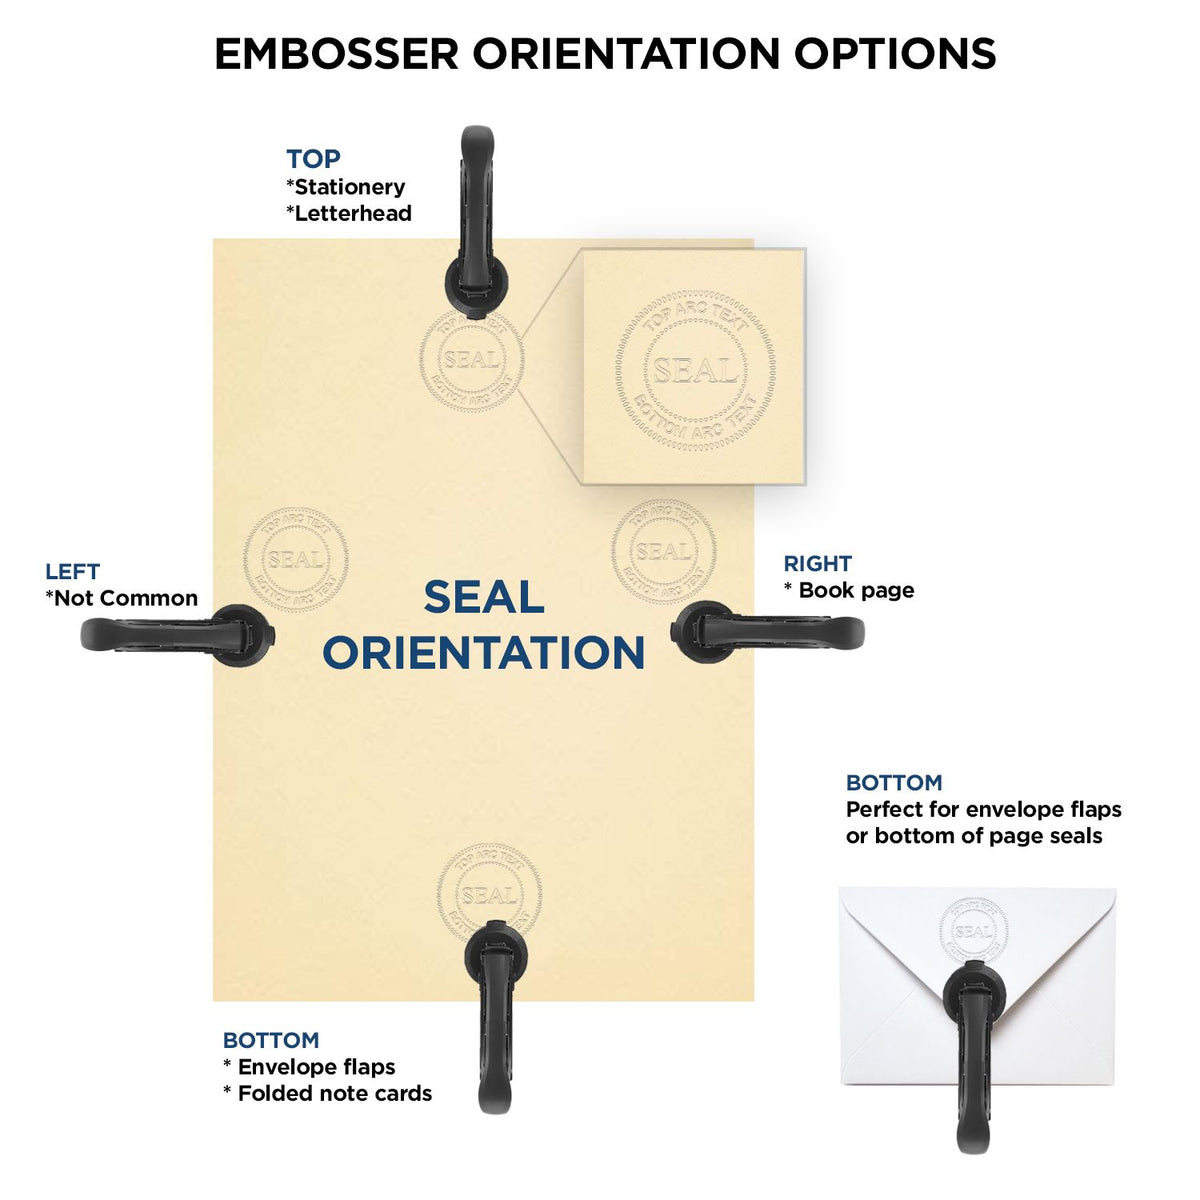 An infographic for the Handheld Minnesota Land Surveyor Seal showing embosser orientation, this is showing examples of a top, bottom, right and left insert.